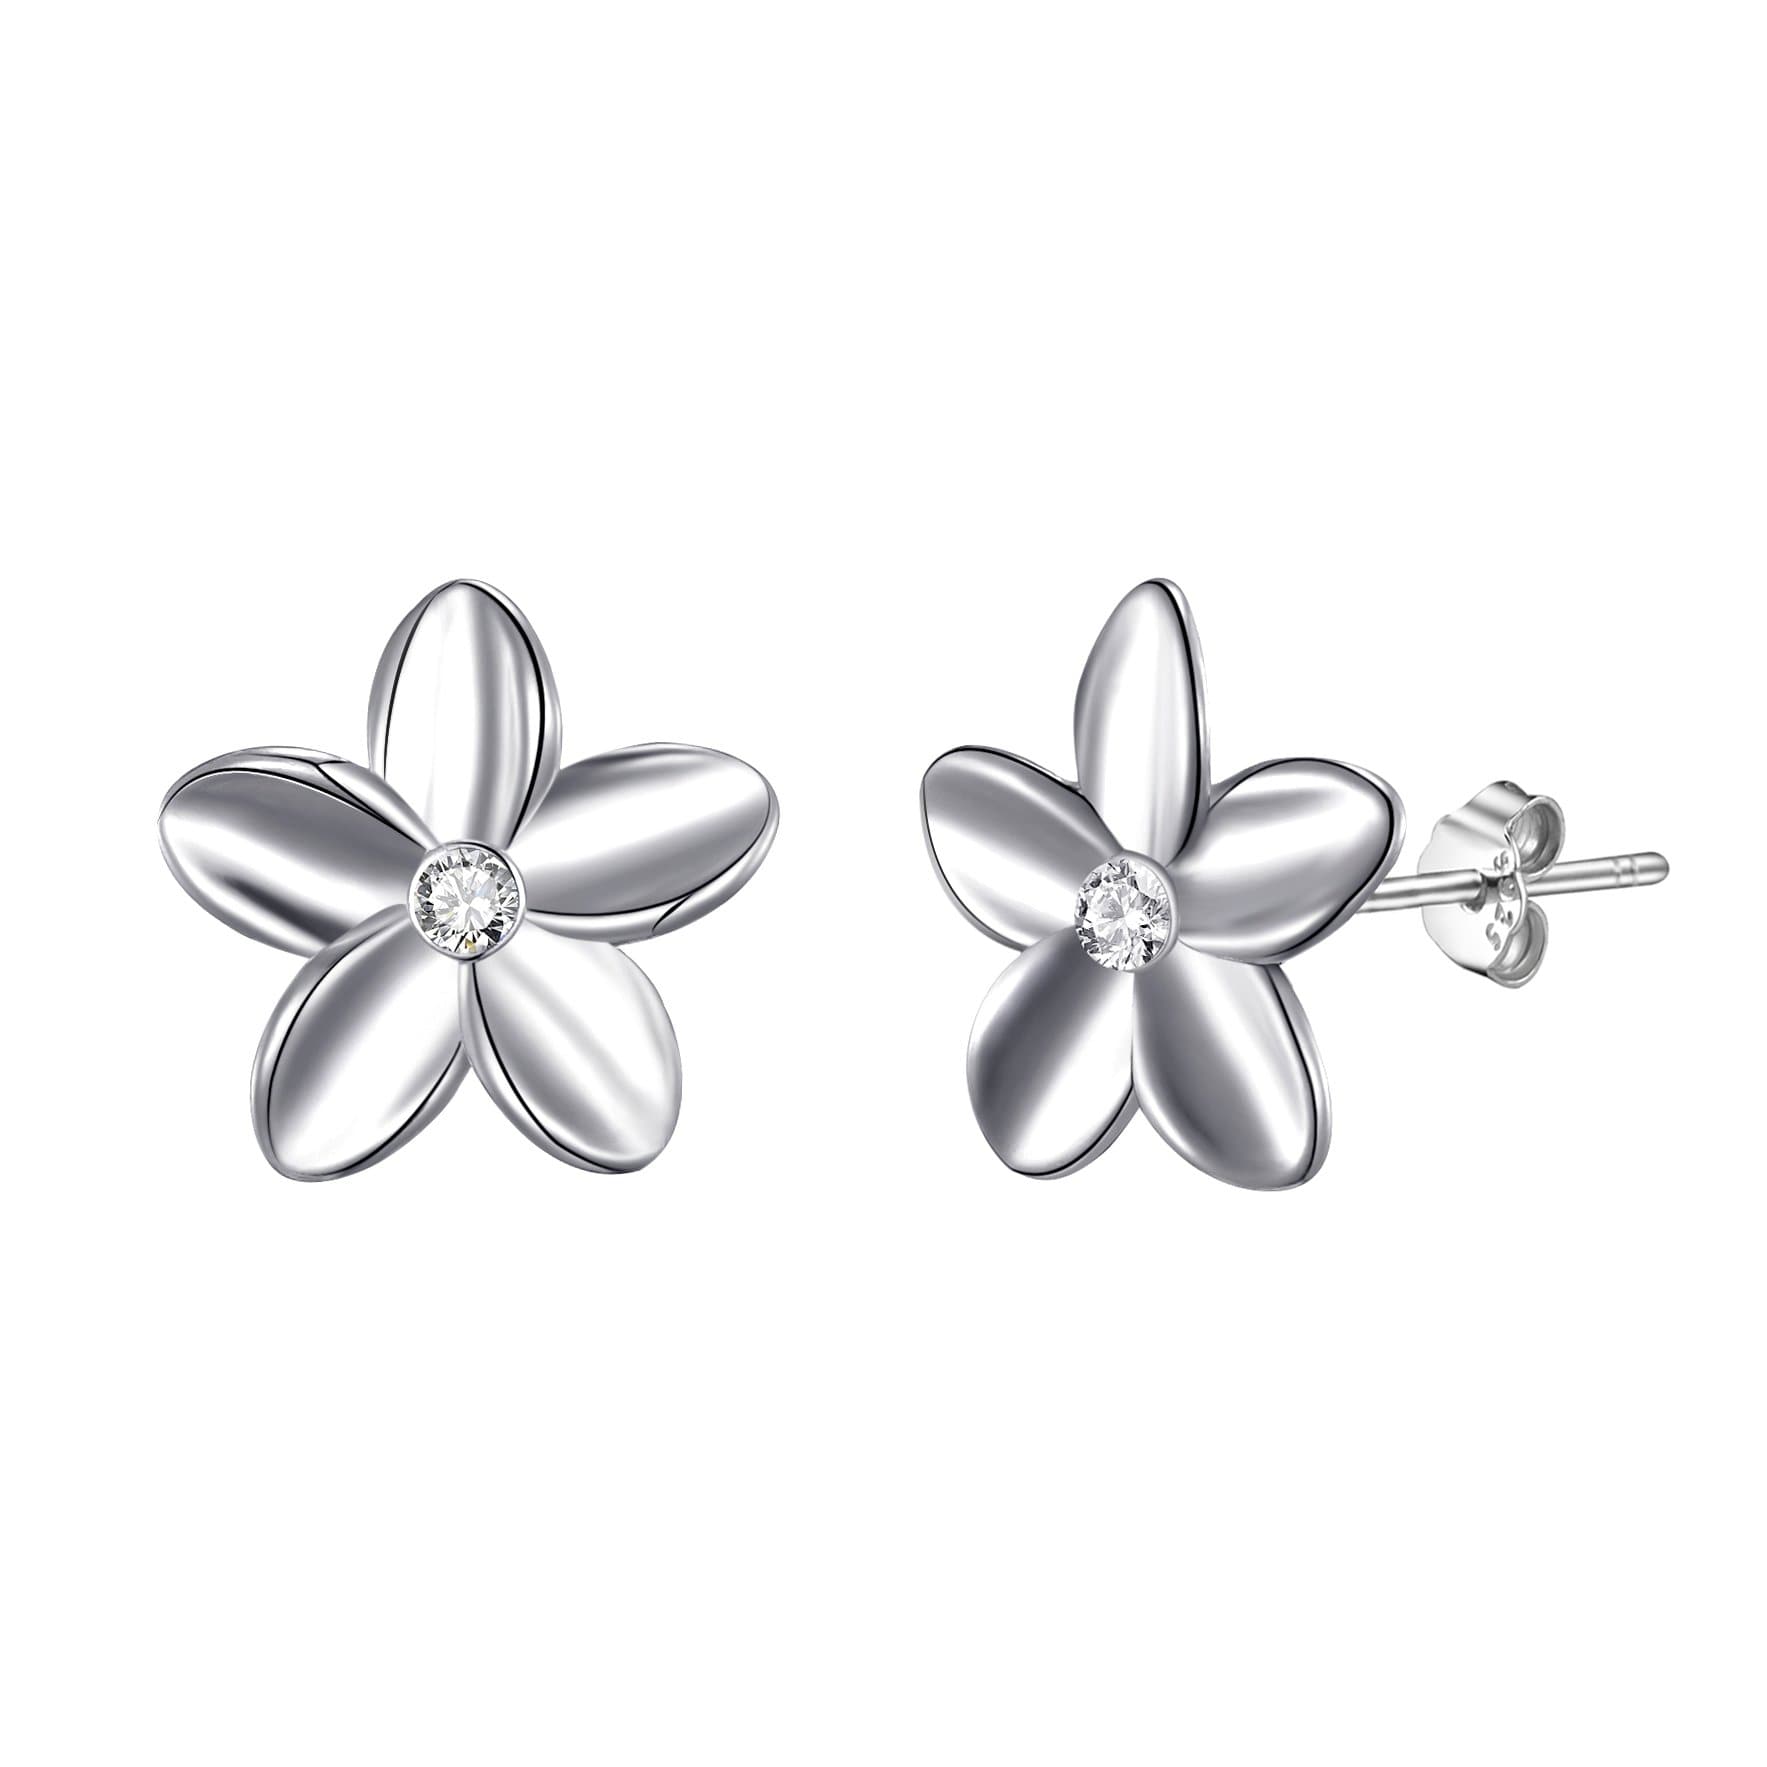 Sterling Silver Flower Earrings Created with Zircondia® Crystals by Philip Jones Jewellery